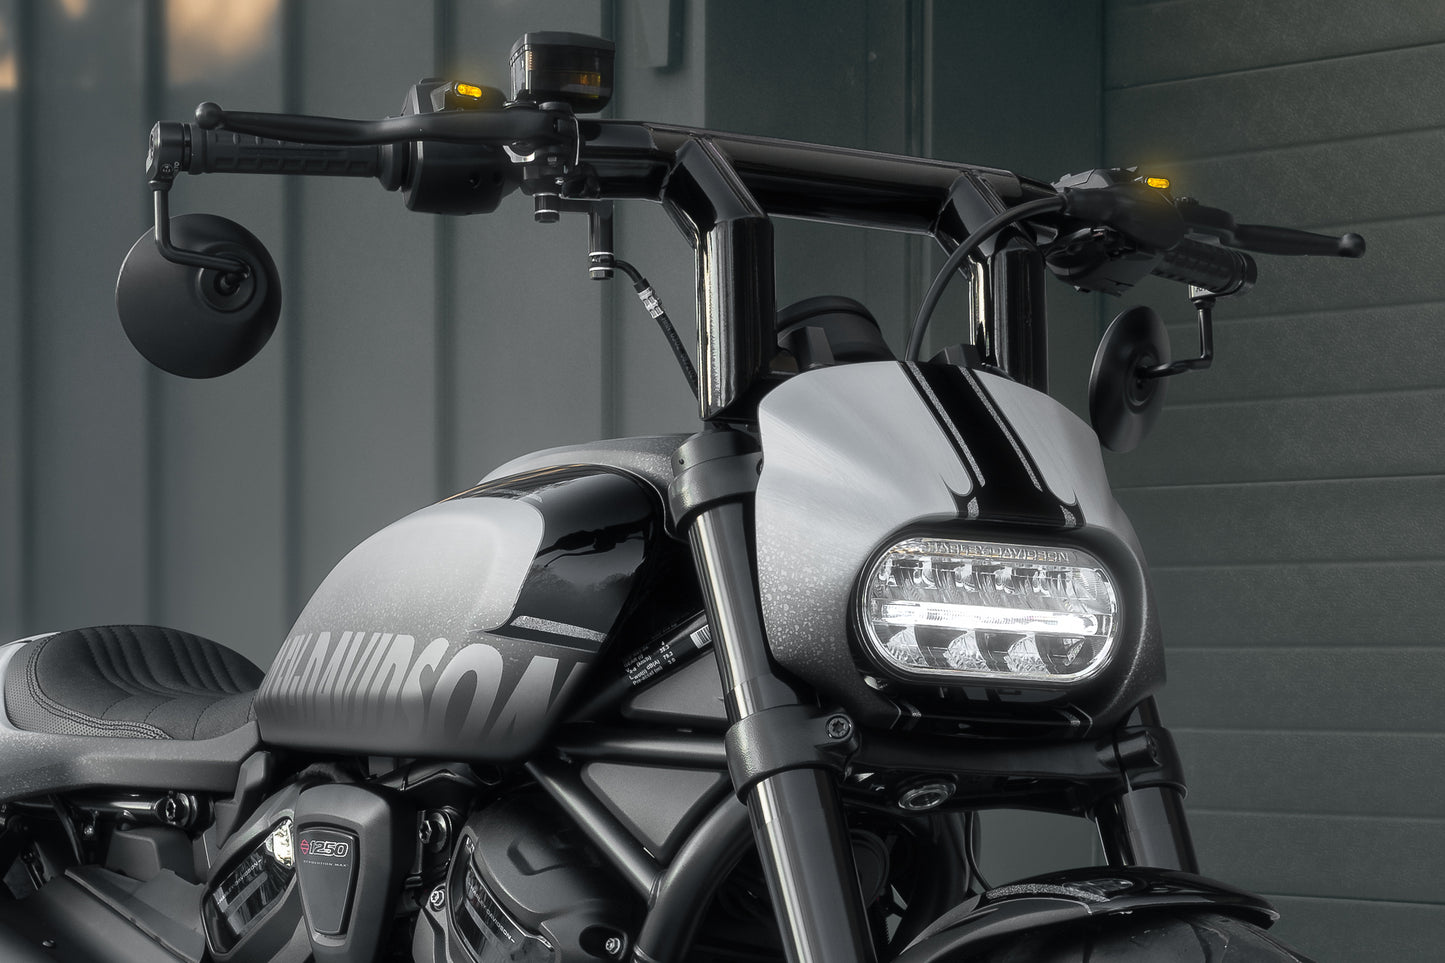 Harley Davidson motorcycle with Killer Custom front LED turn signals from the front grey background